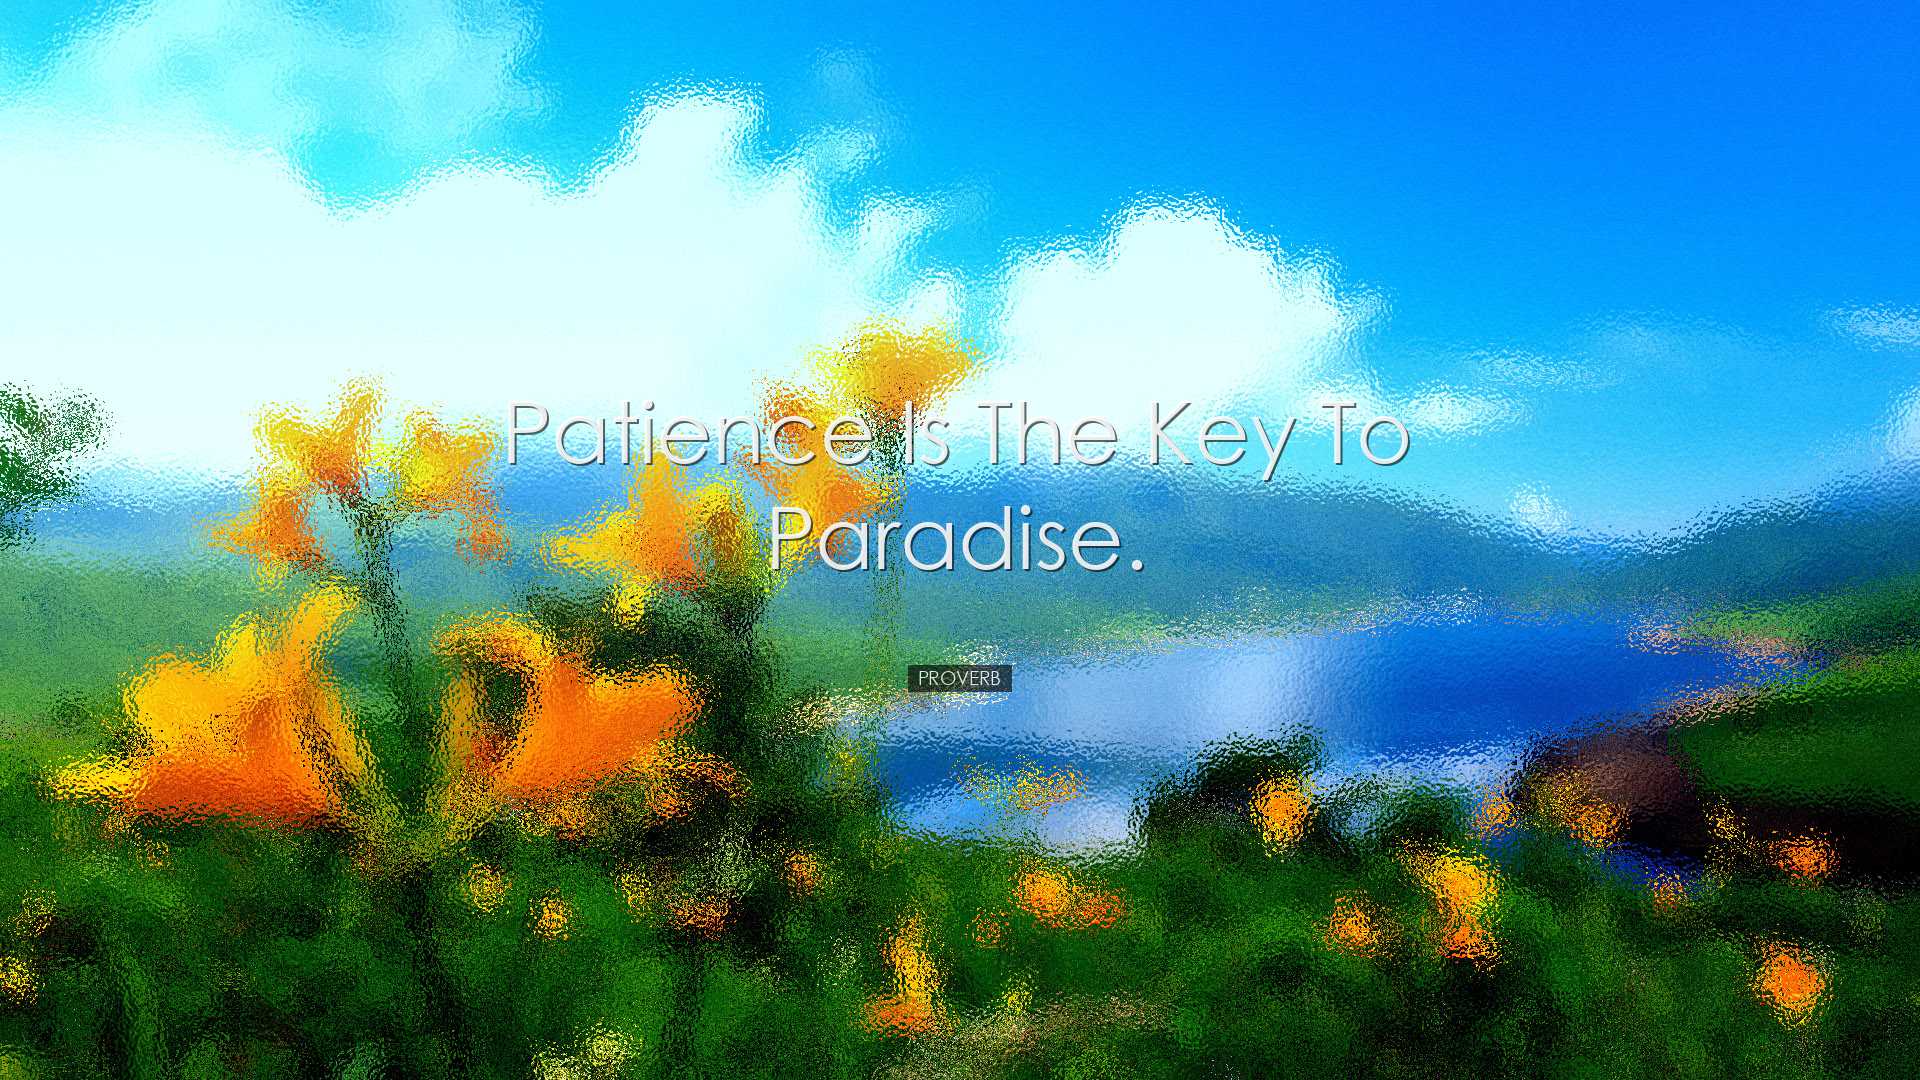 Patience is the key to paradise. - Proverb